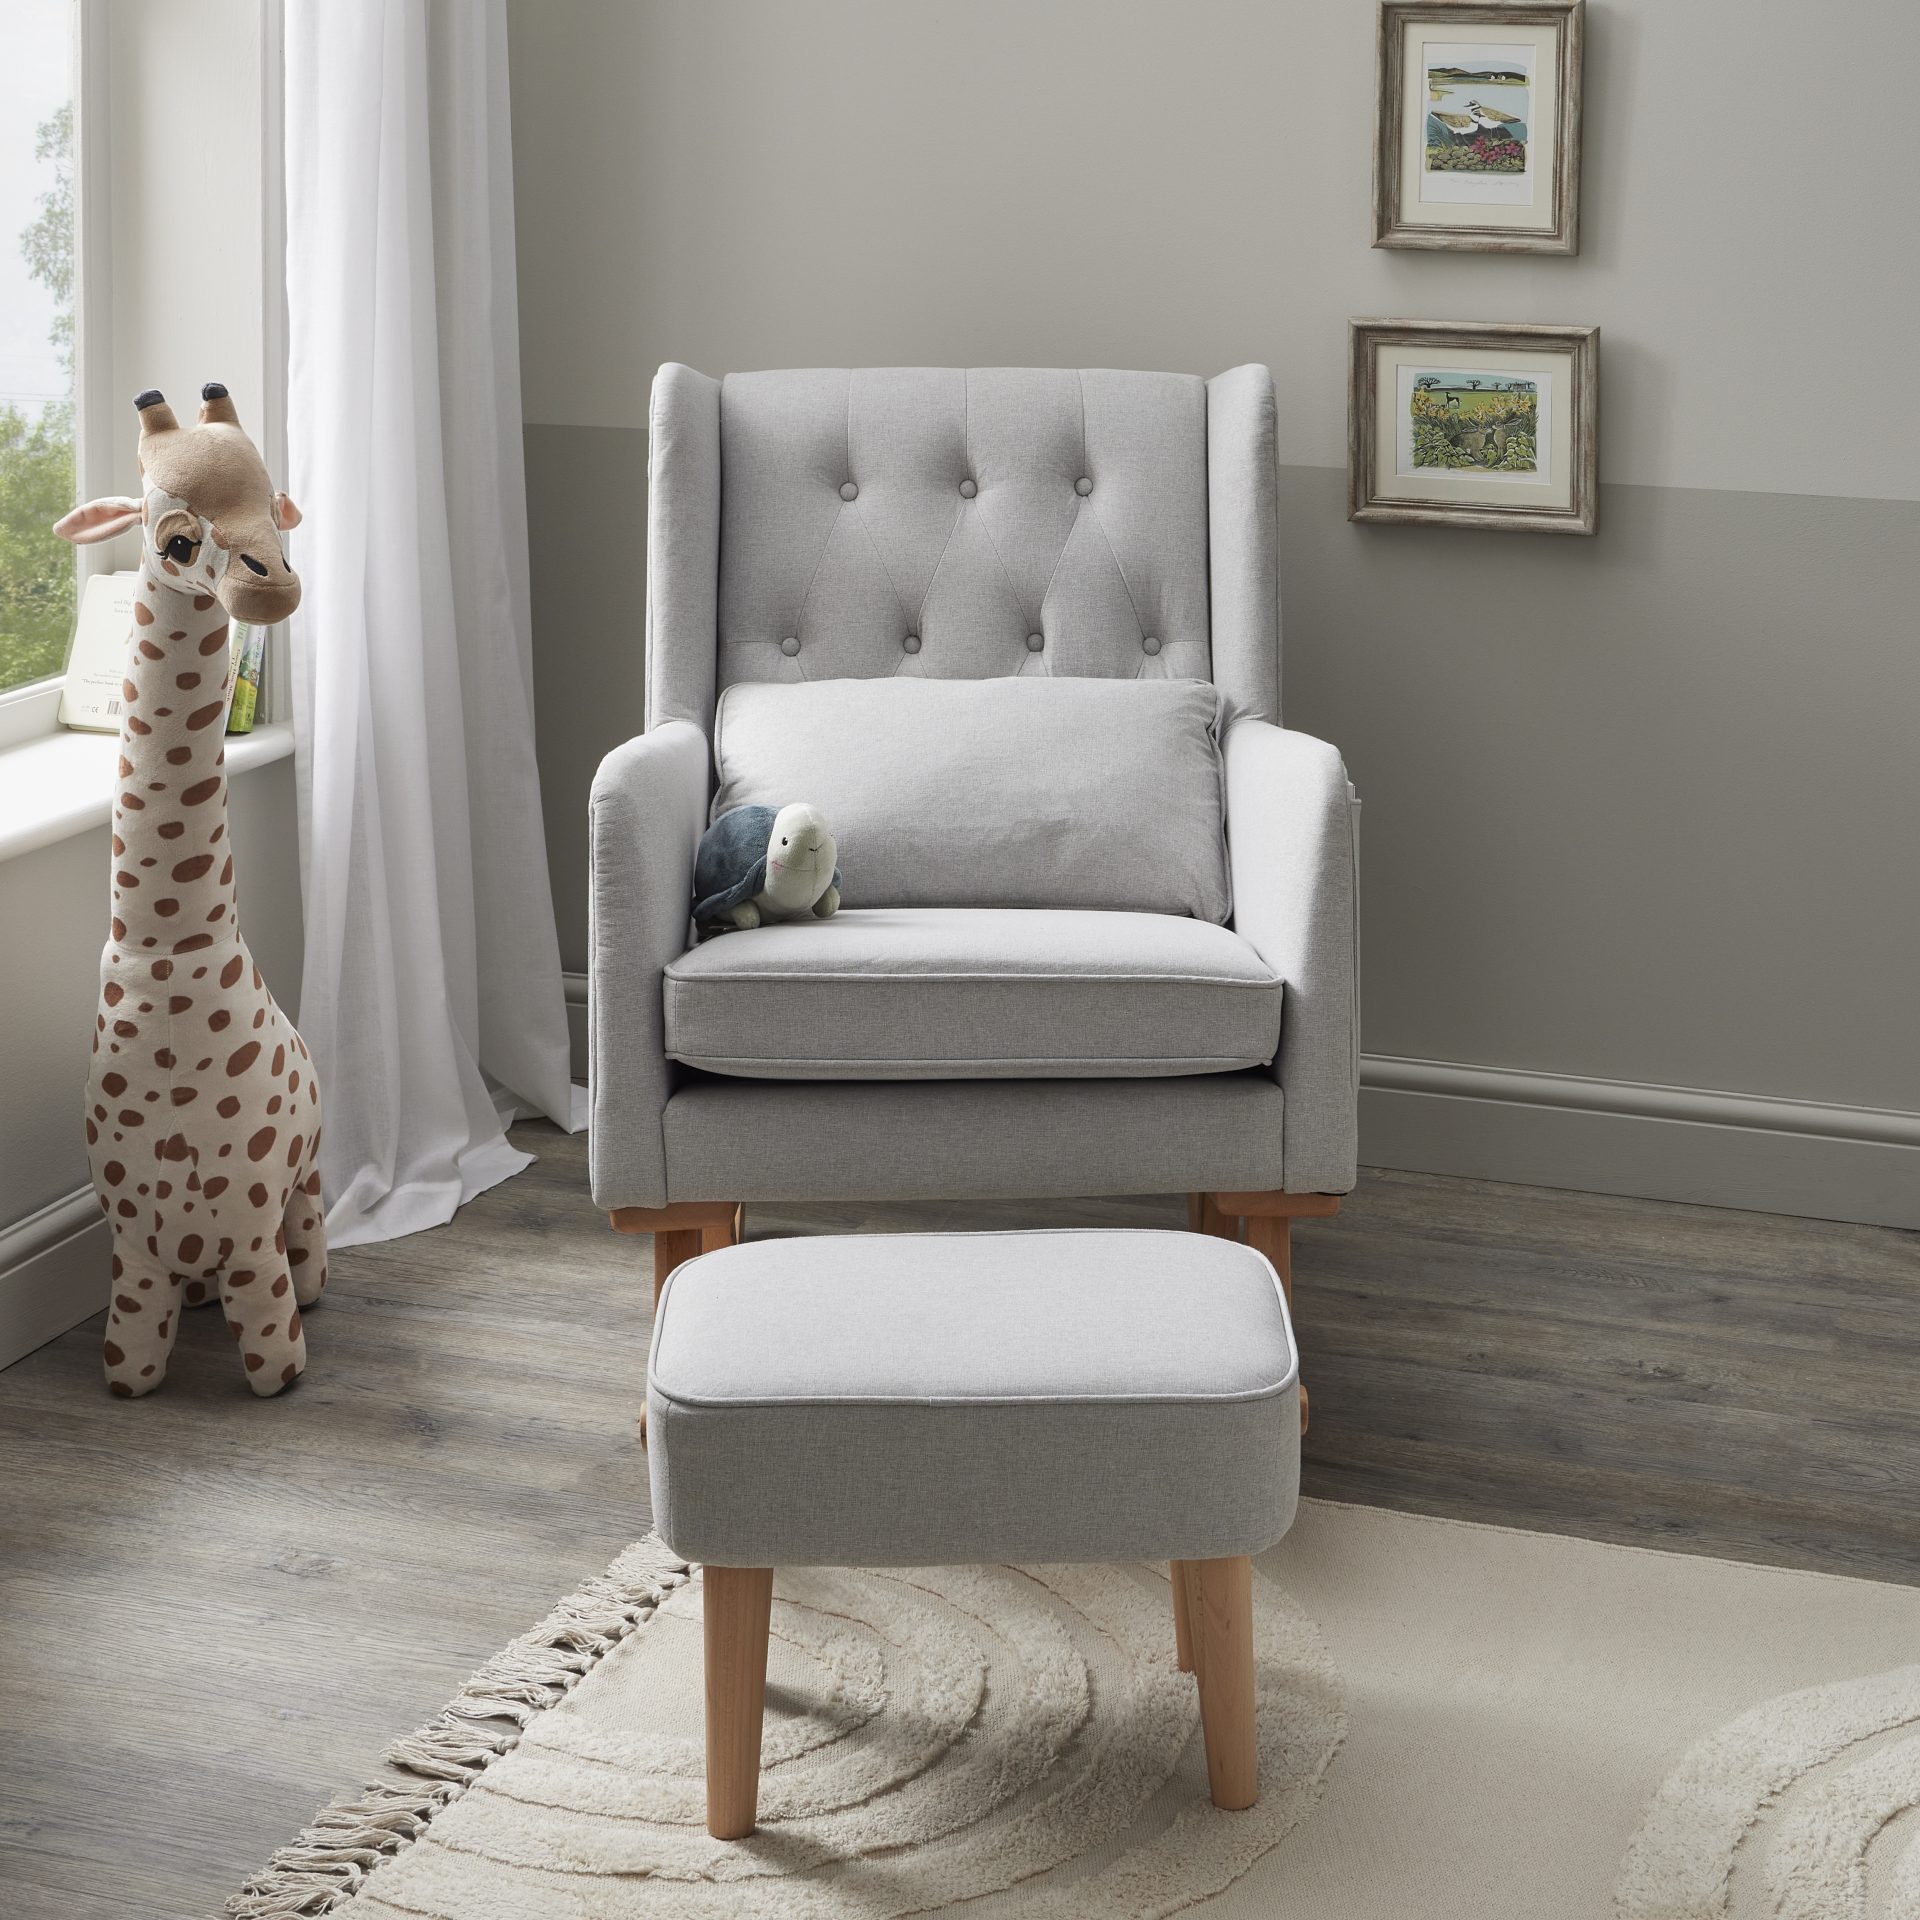 Lux Nursing Chair With Stool GREY